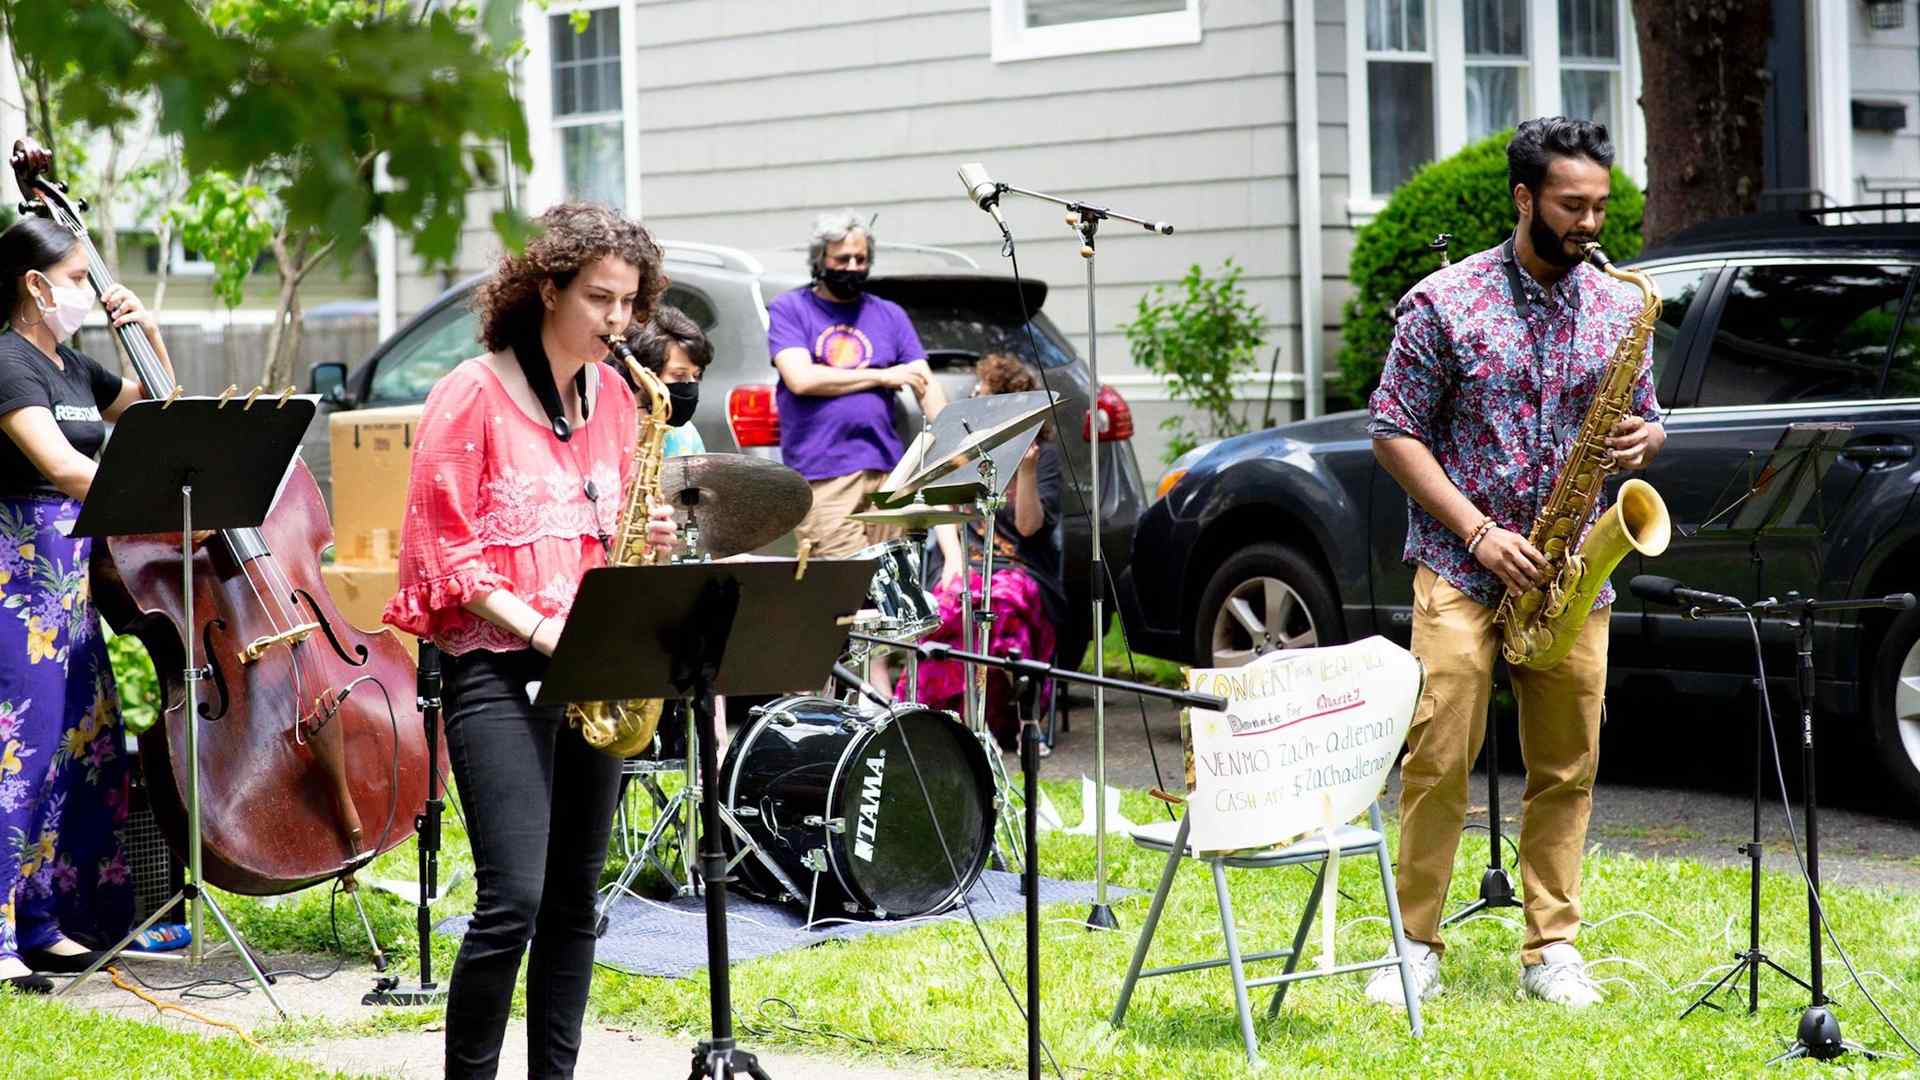 A jazz combo performing outdoors, on the lawn of a suburban home